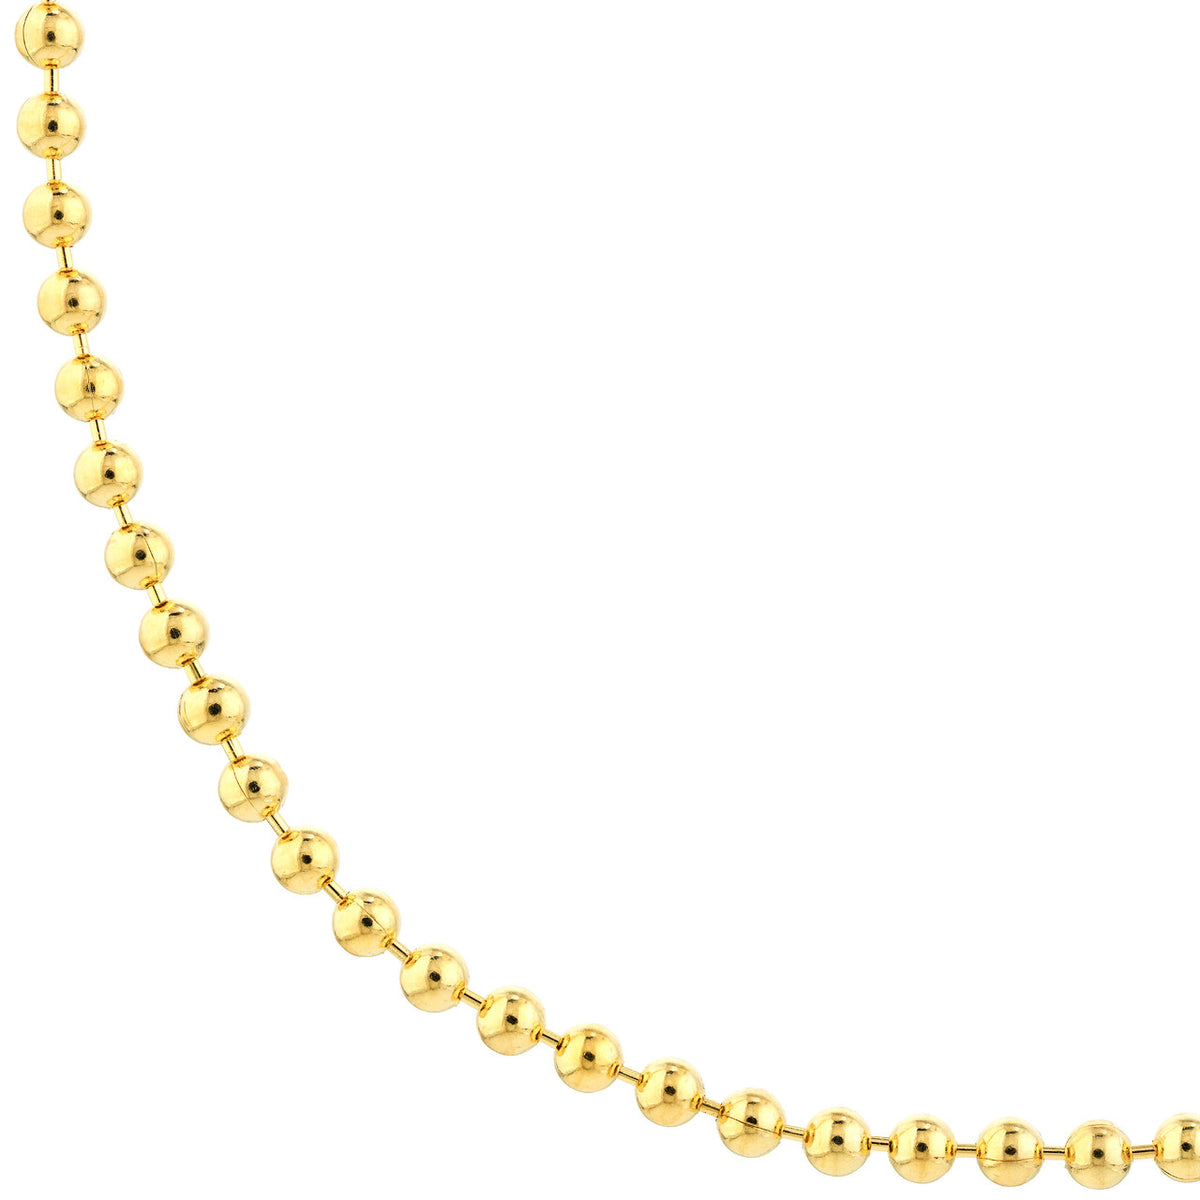 Solid 14K Gold 3.5mm Bead Chain Necklace with Lobster Lock